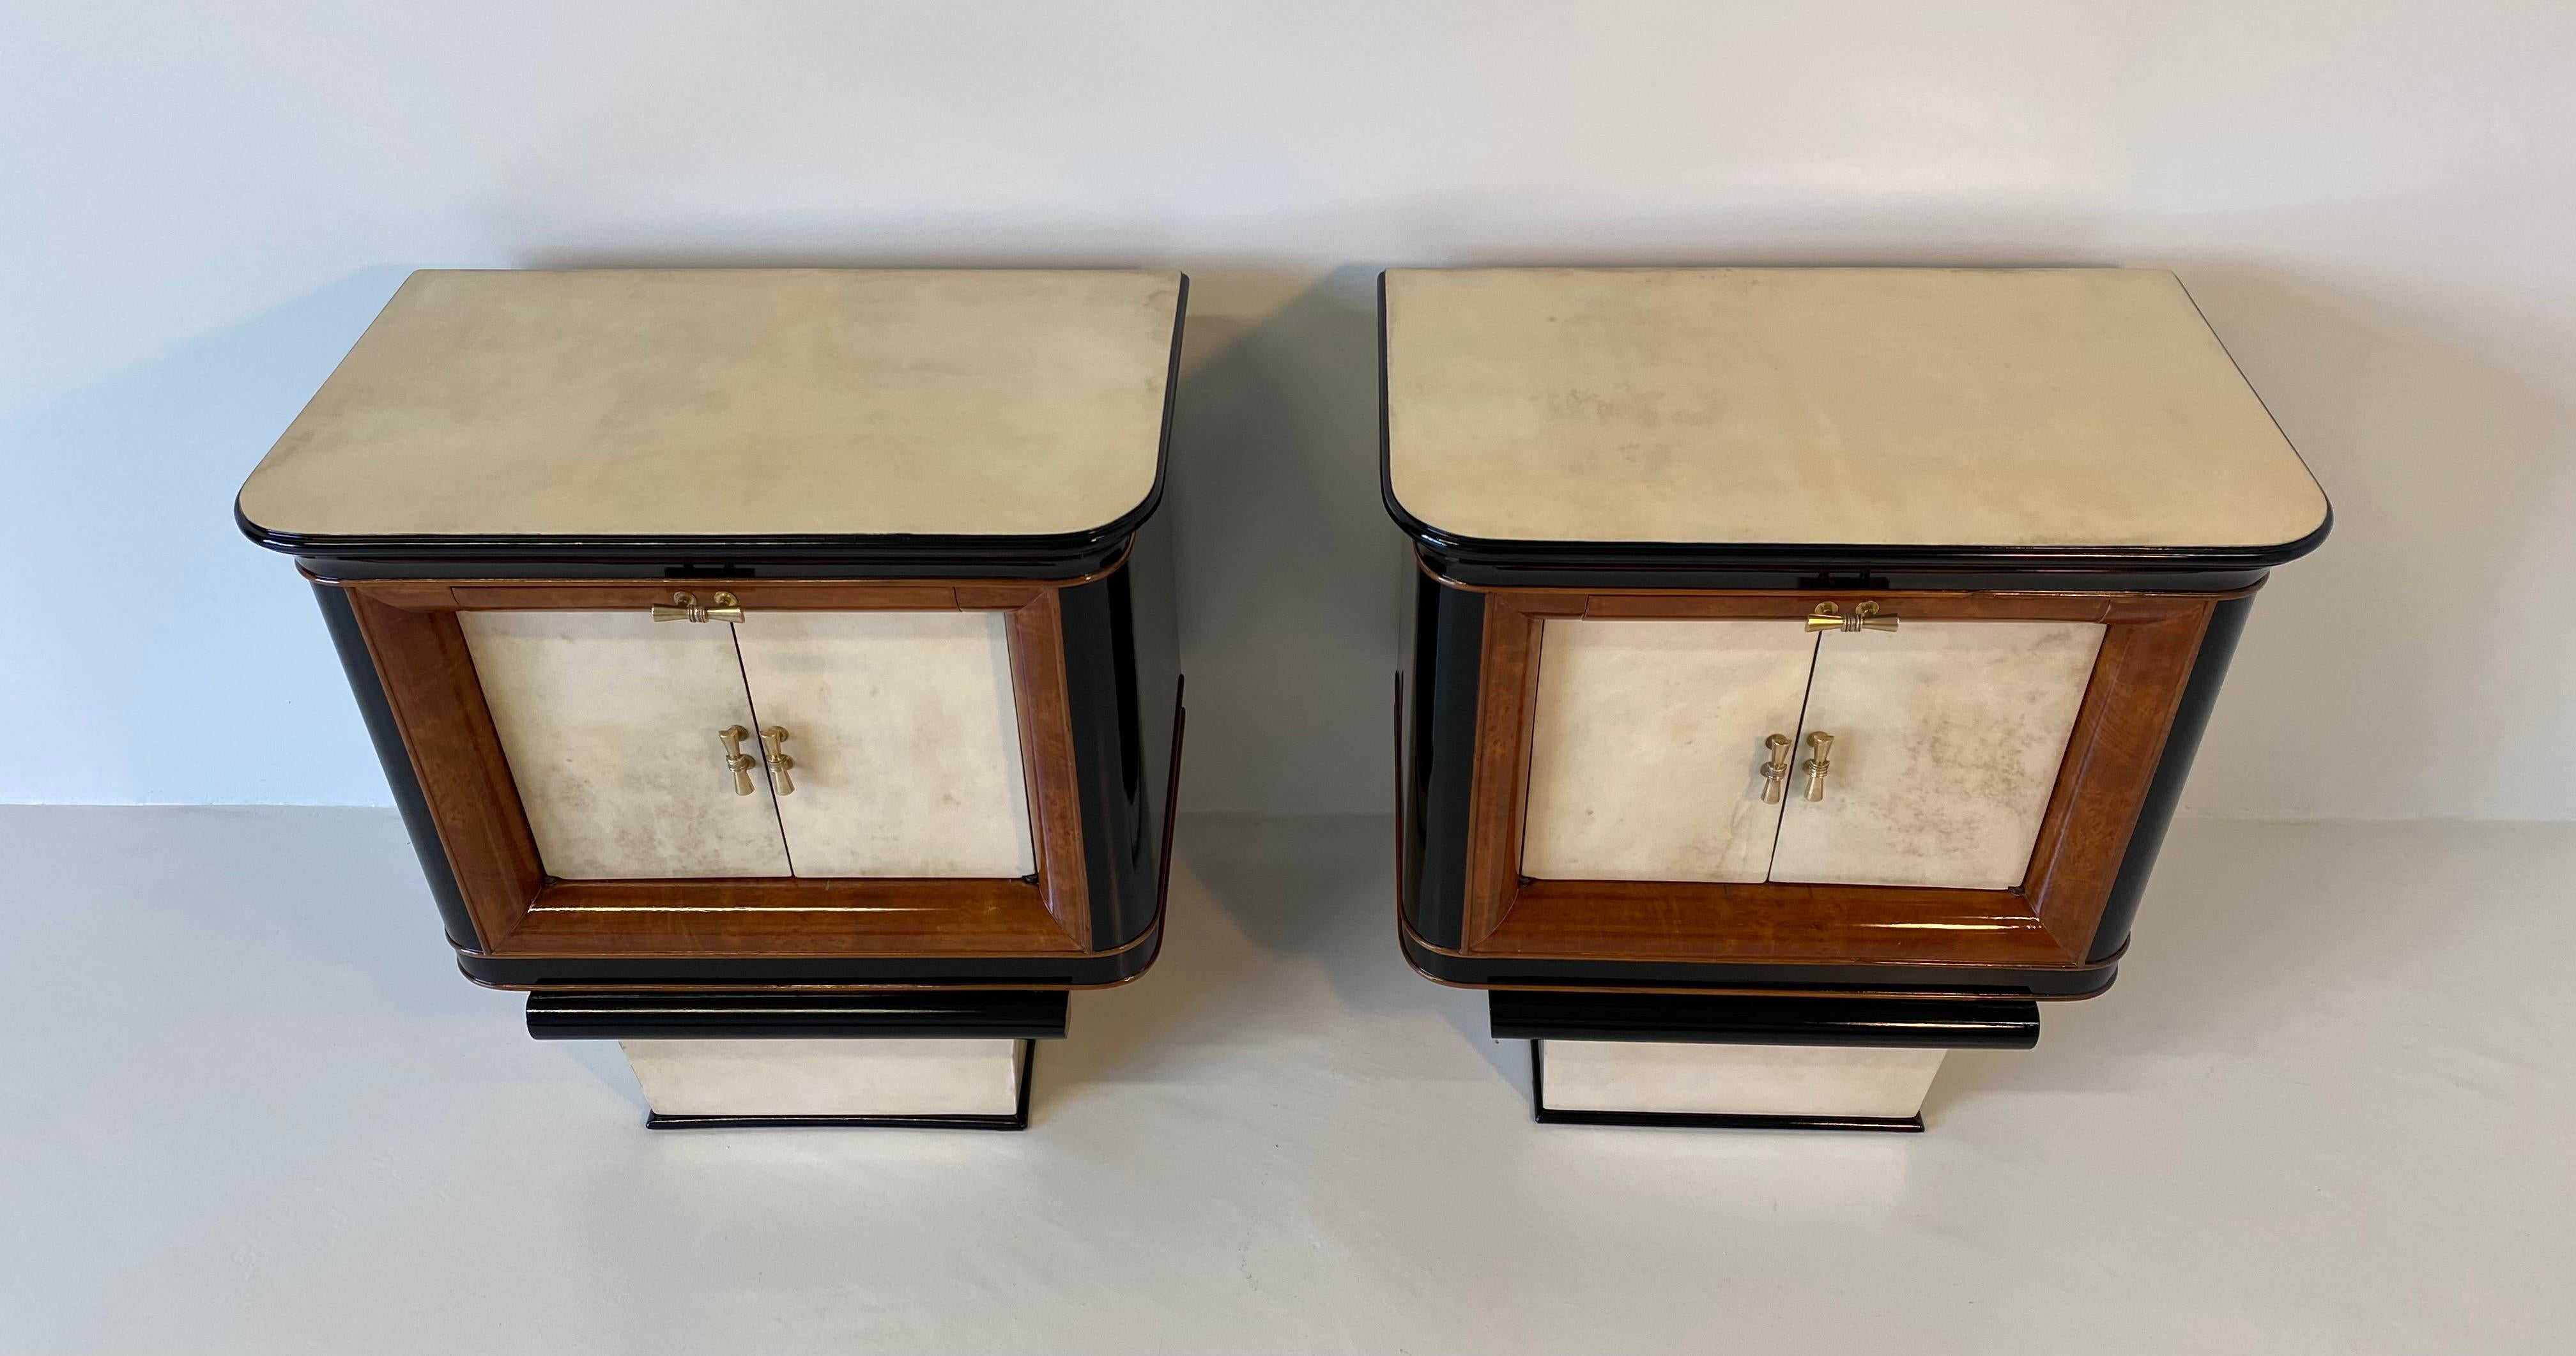 Italian bedside tables from the 1930s produced in Italy.
The front of the doors, the base and the top are in parchment while the profiles are in briar of myrtle.
The structure and the details are in black lacquered wood.
The handles are in